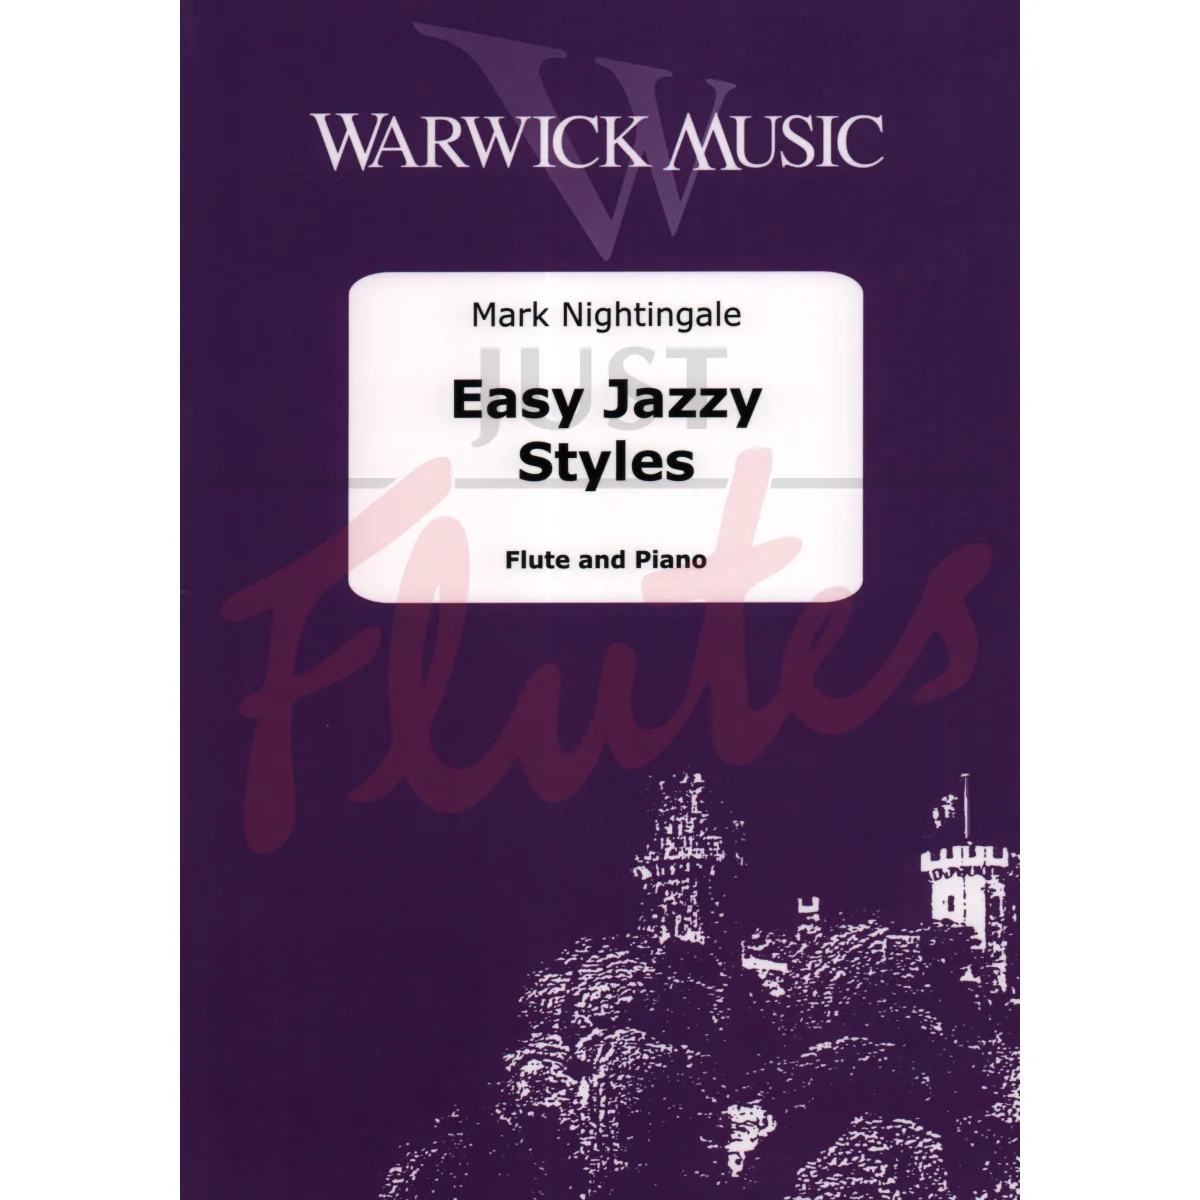 Easy Jazzy Styles for Flute and Piano